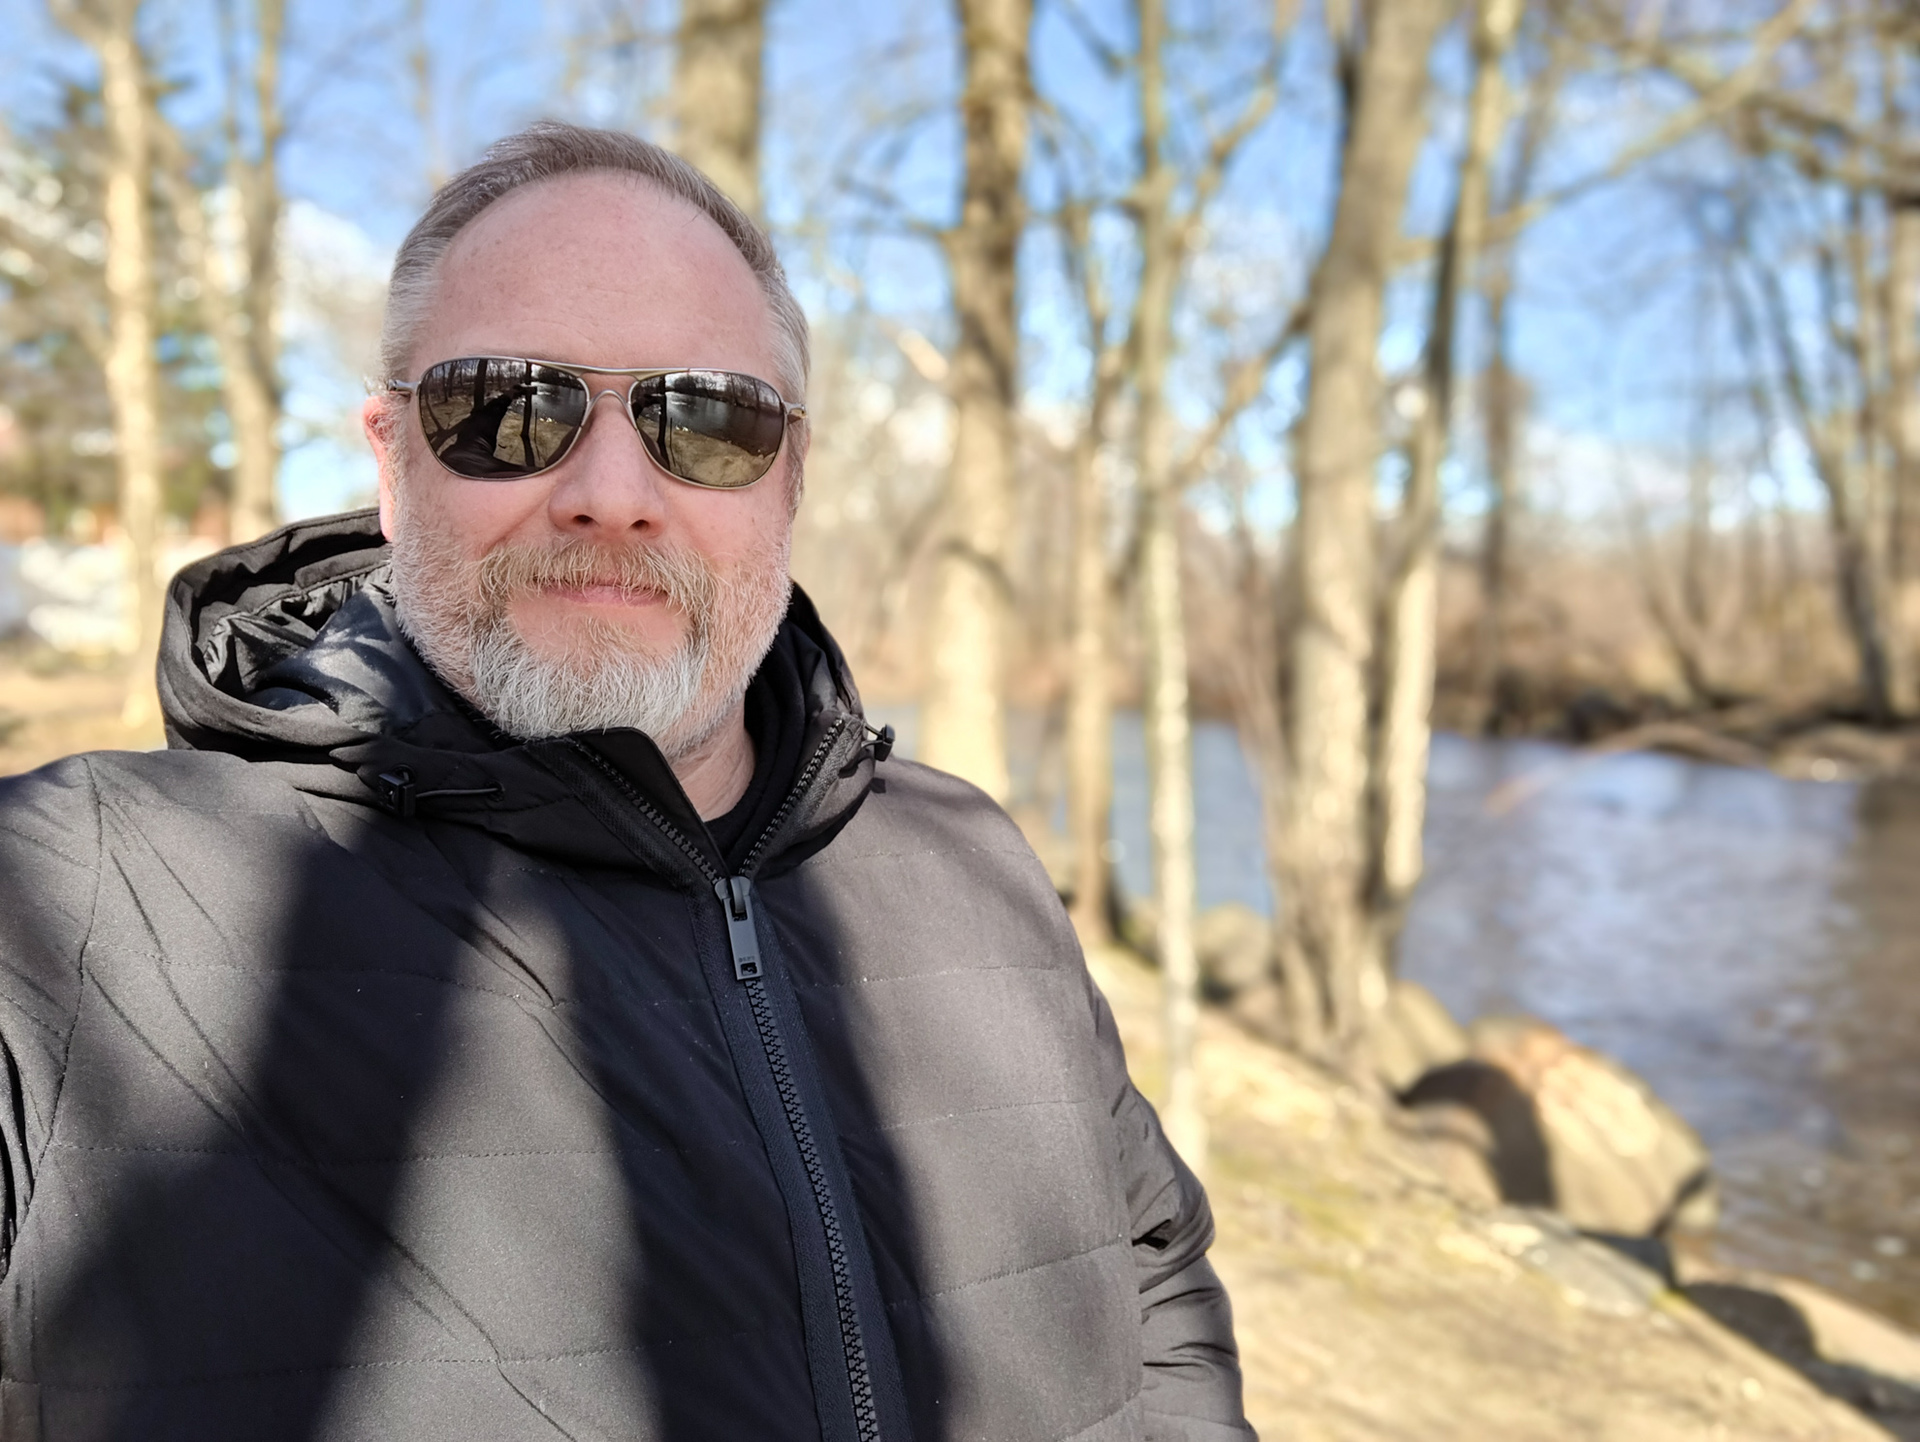 OnePlus 10 Pro self portrait of a man wearing a jacket and shades, outside